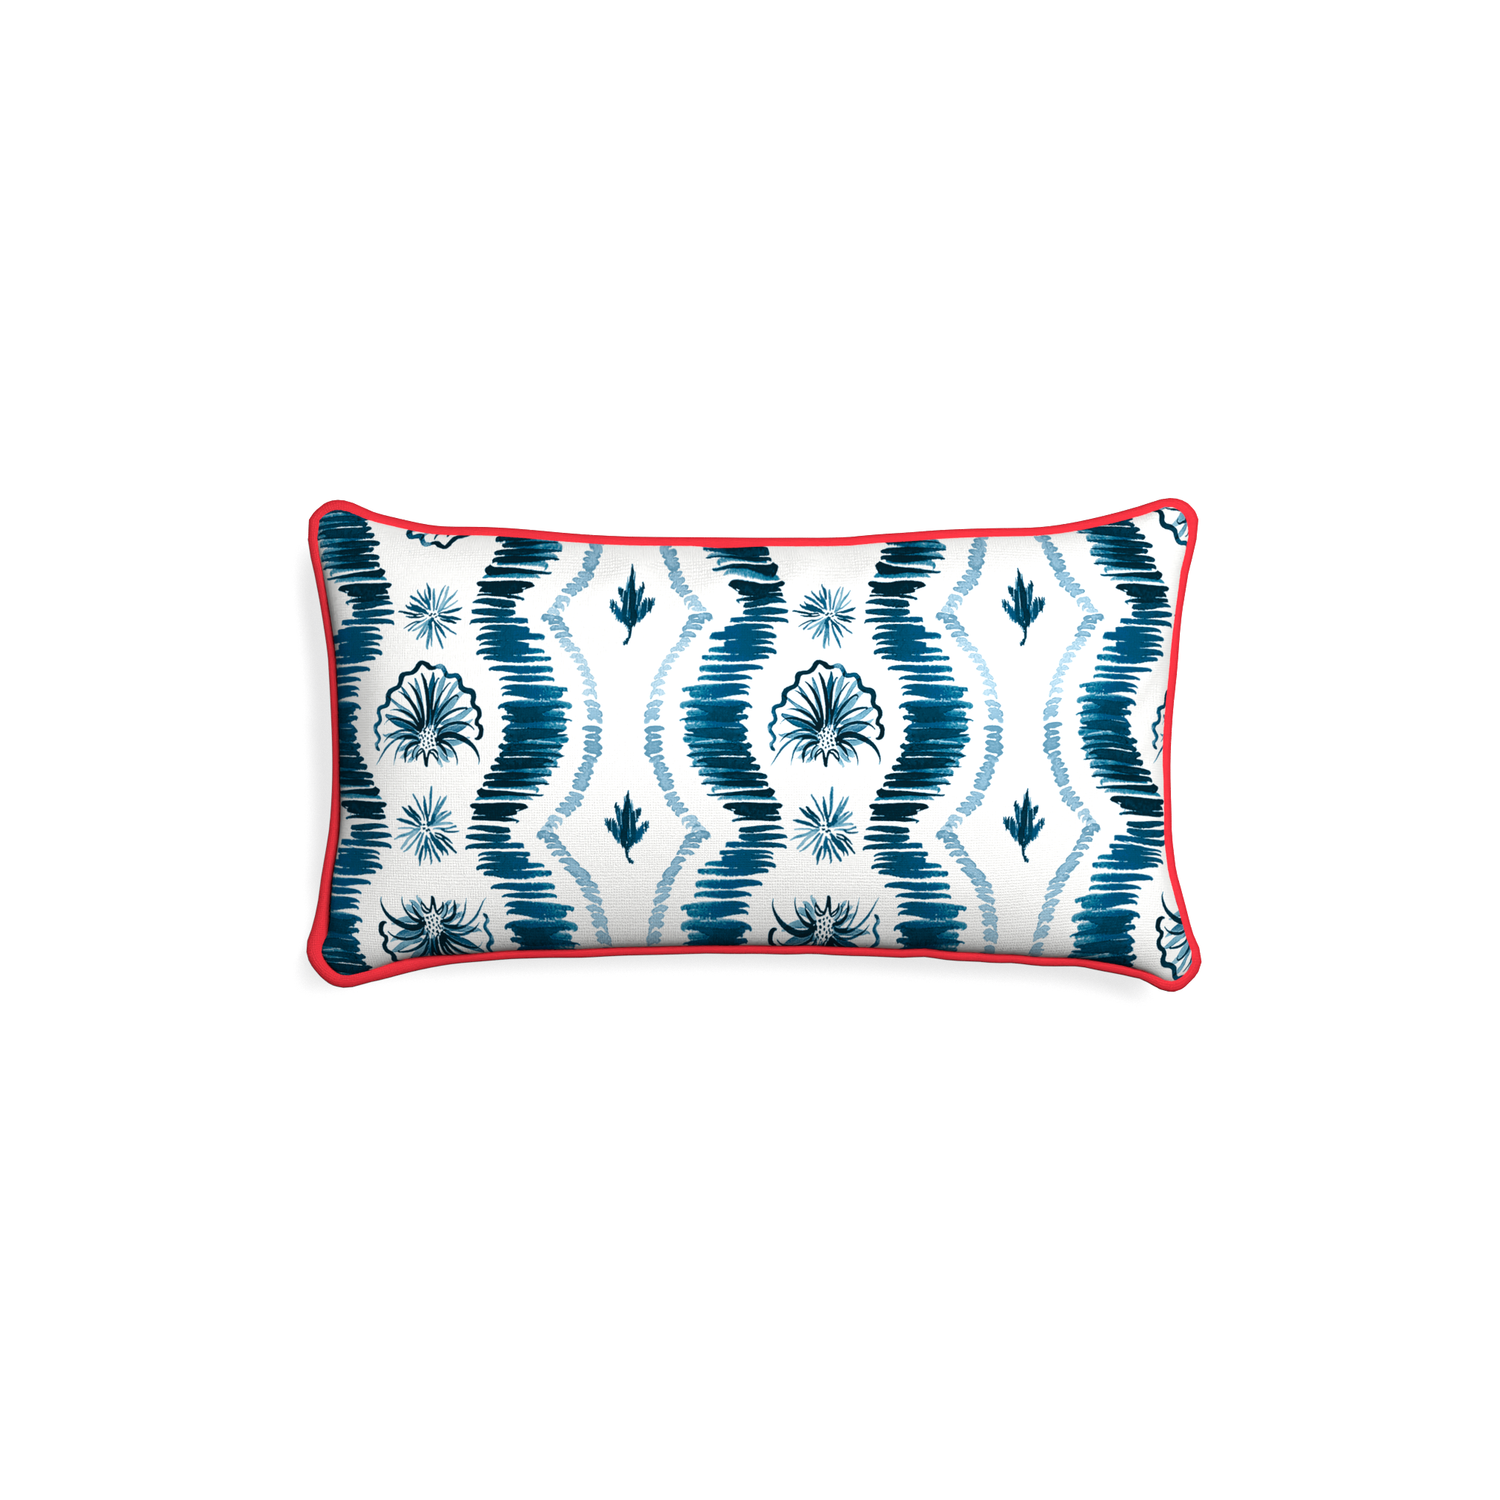 Petite-lumbar alice custom blue ikatpillow with cherry piping on white background